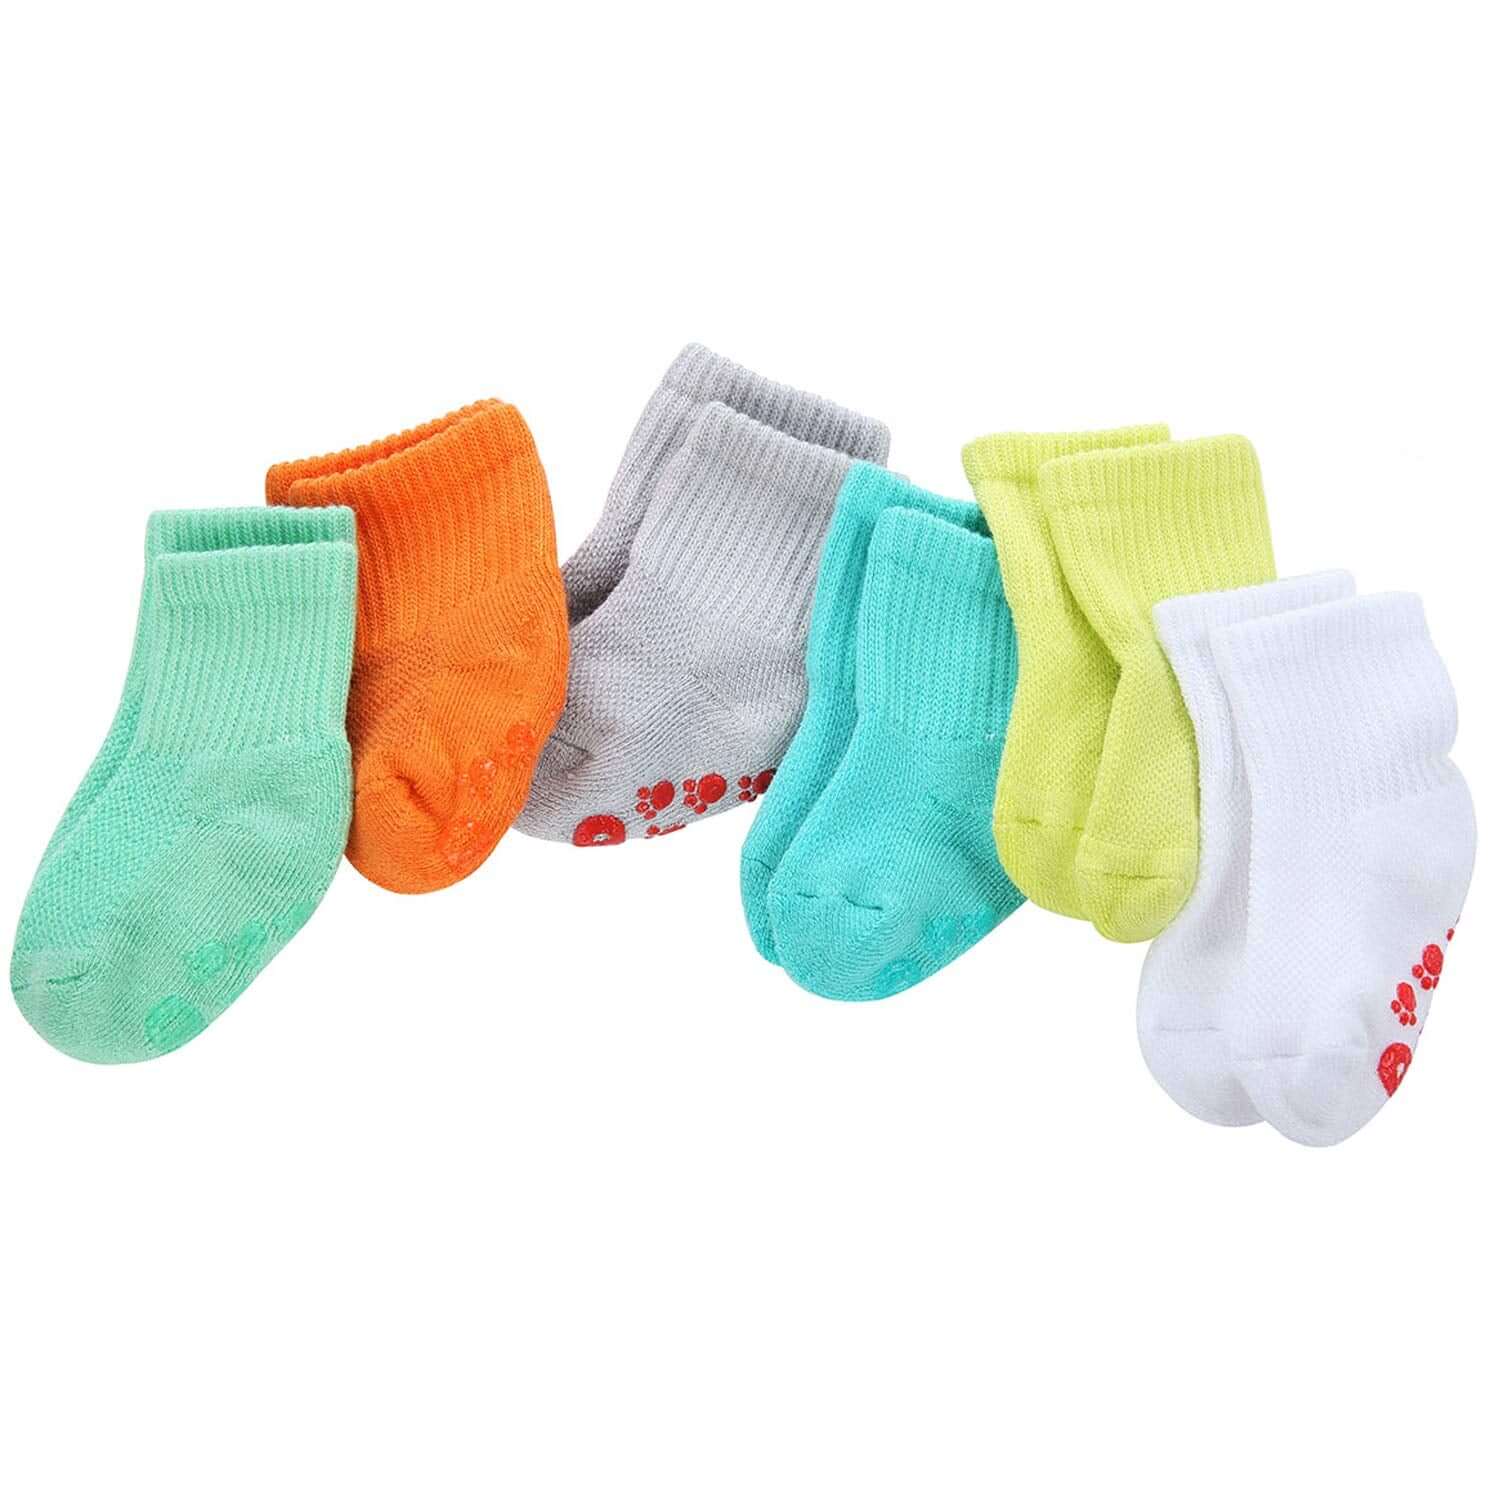 Comfort-Fresh 6pack 0-6 Months Baby Bamboo Colorful Socks - md-diab